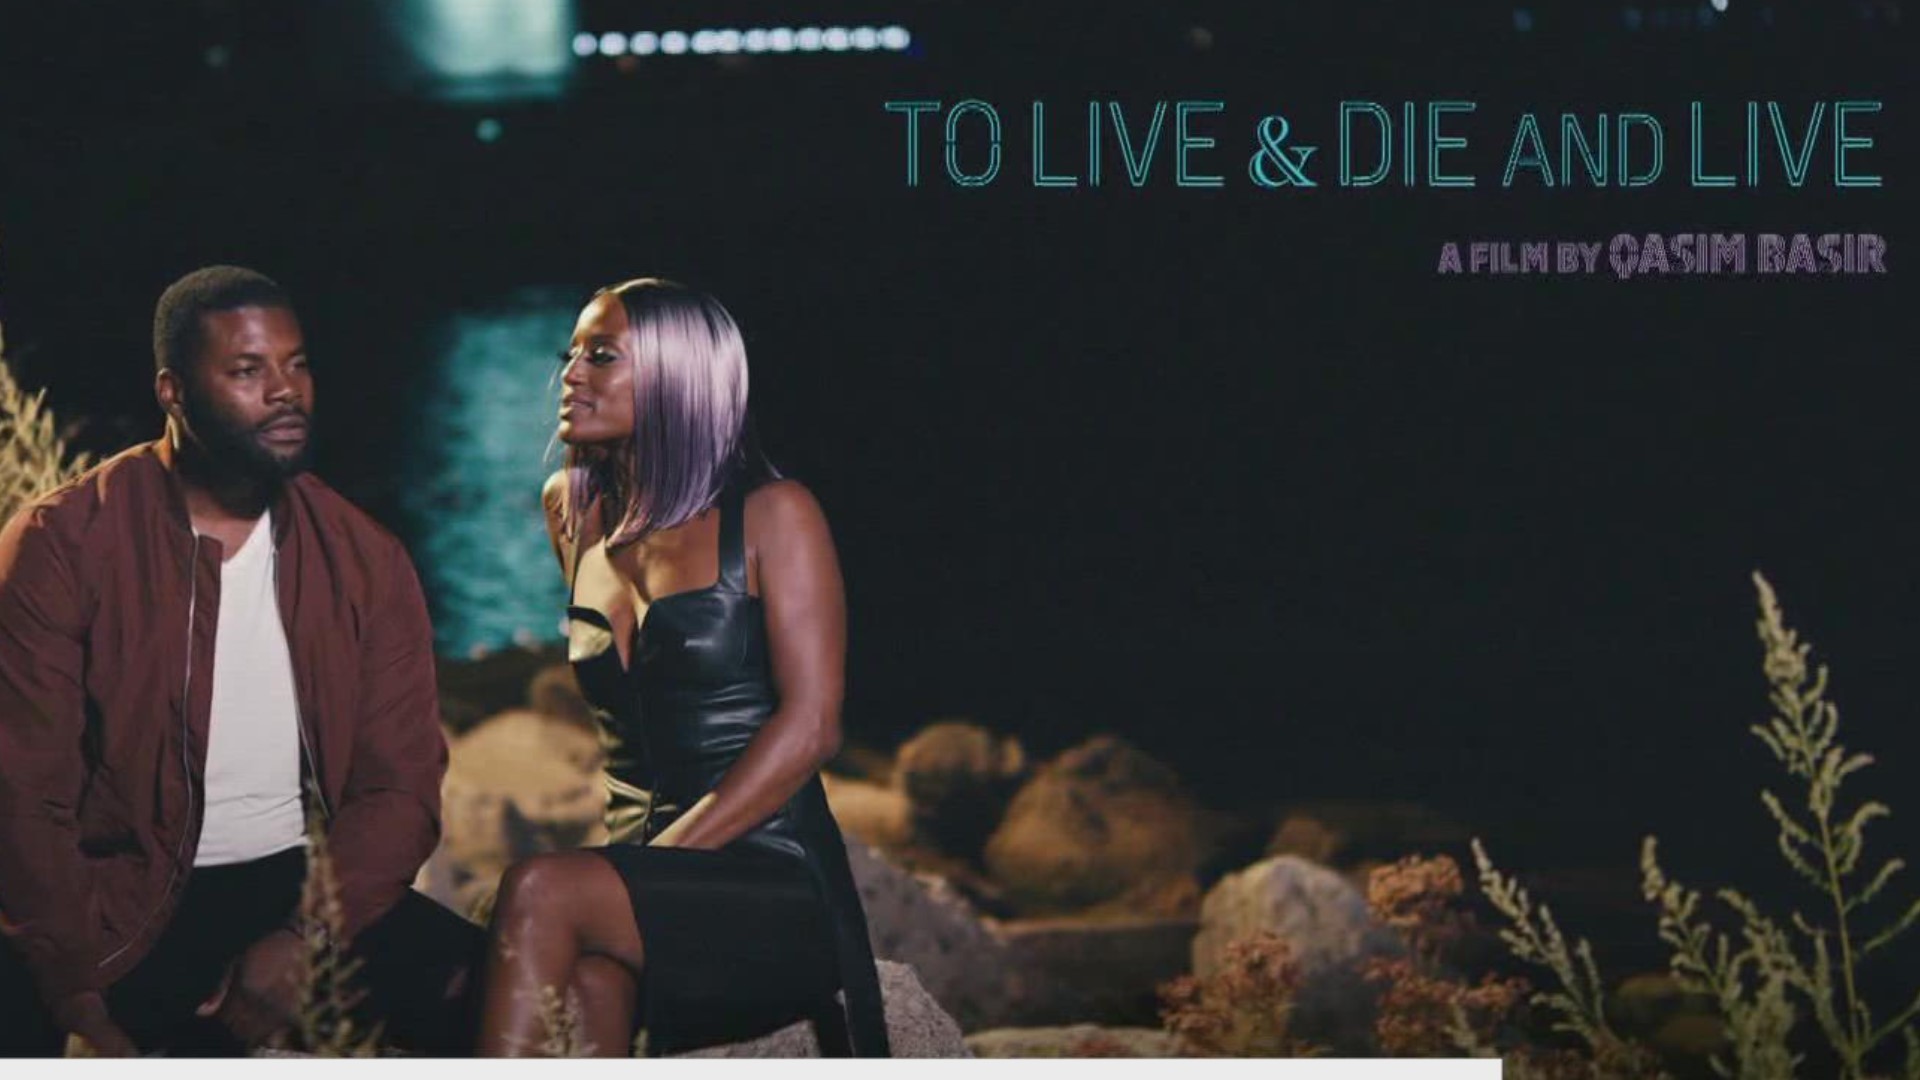 A film producer from Grand Rapids is heading to Sundance Film Festival with the movie To Live and Die and Live that was made in Michigan.